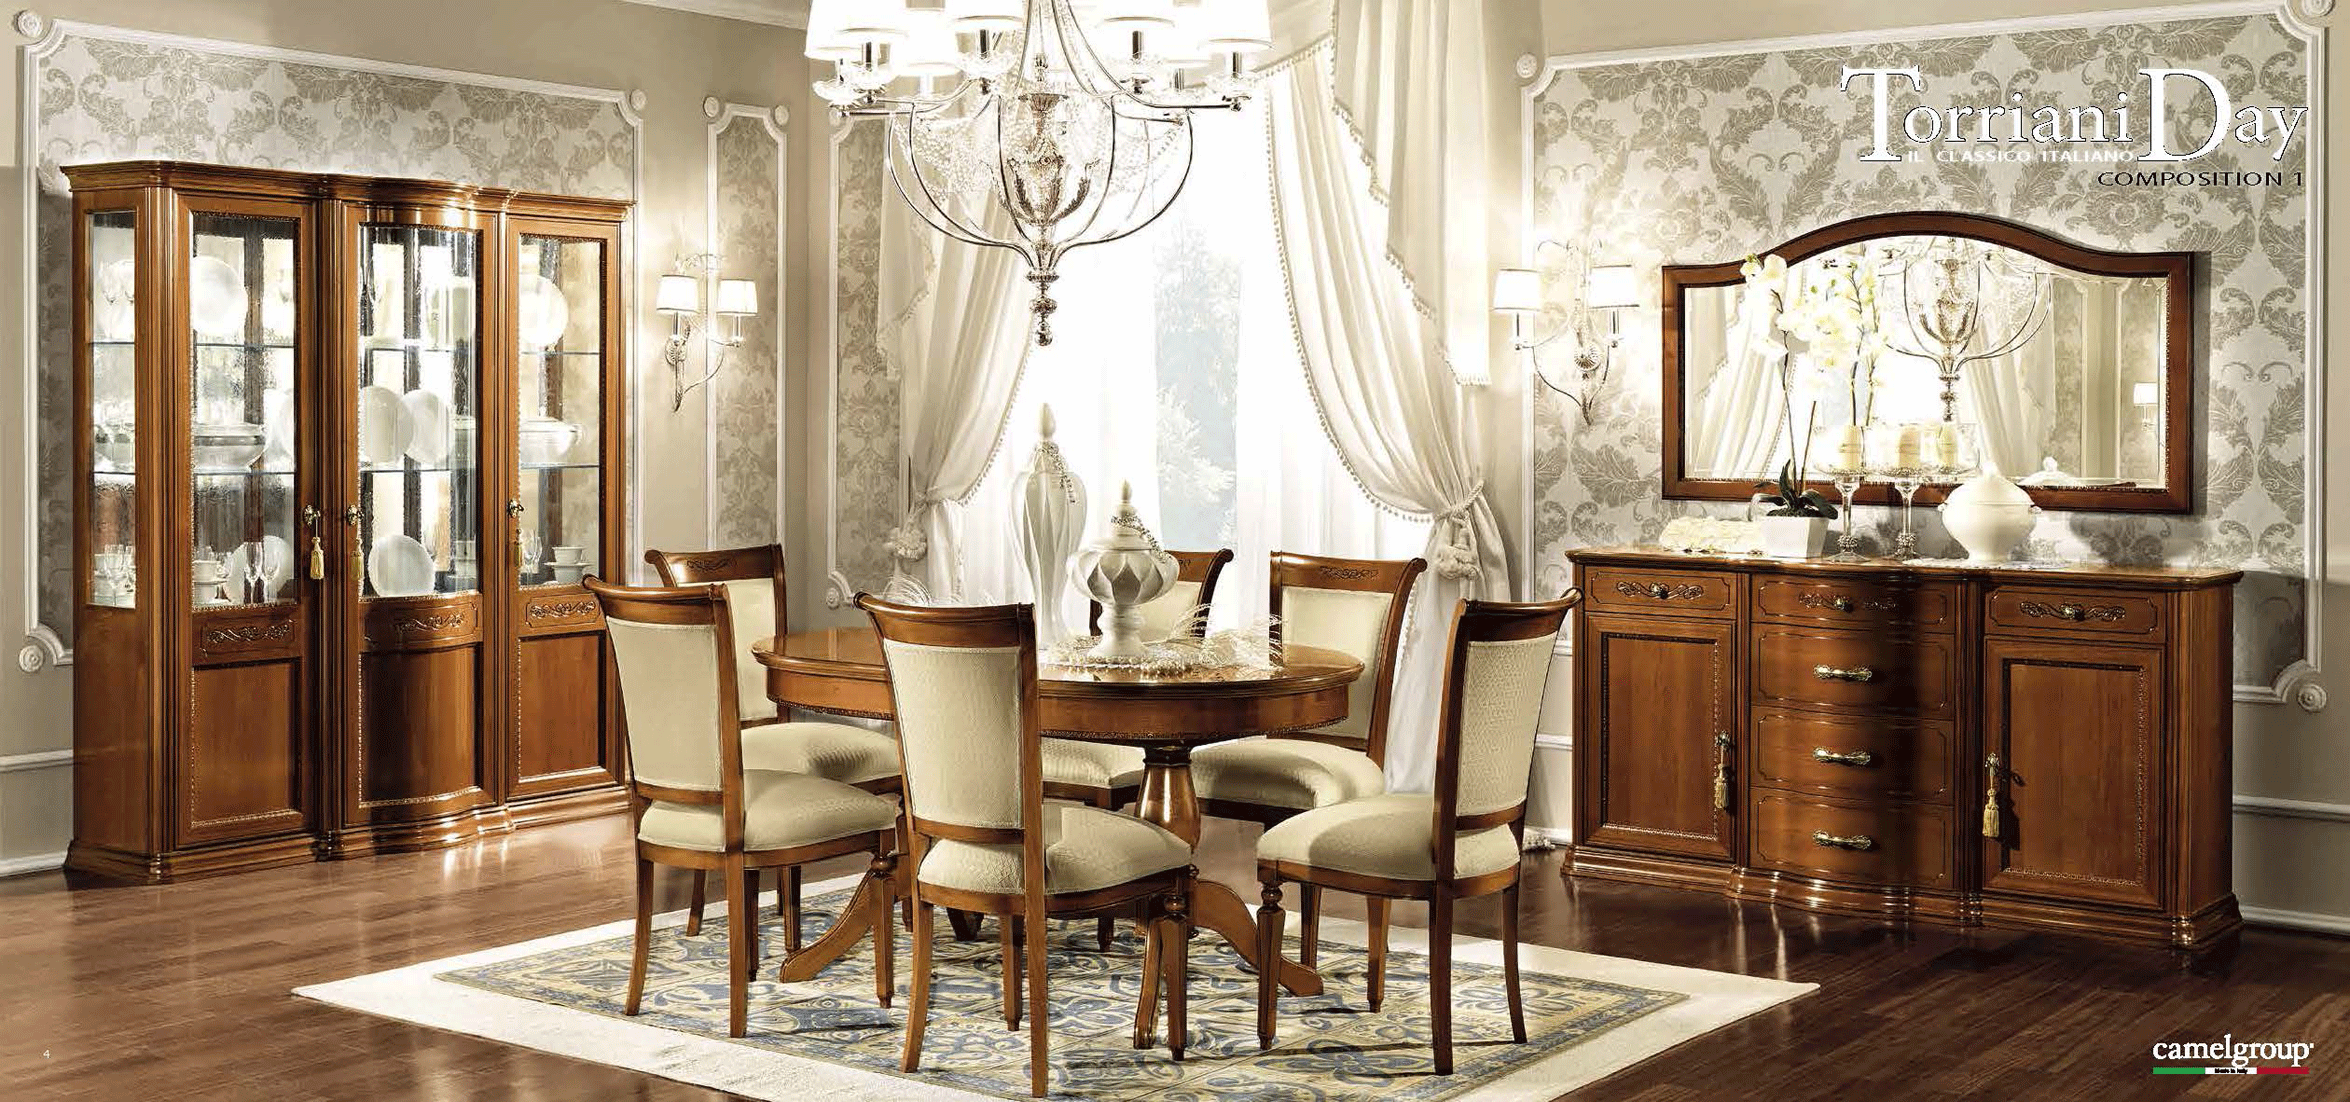 Dining Room Furniture Classic Dining Room Sets Torriani Day